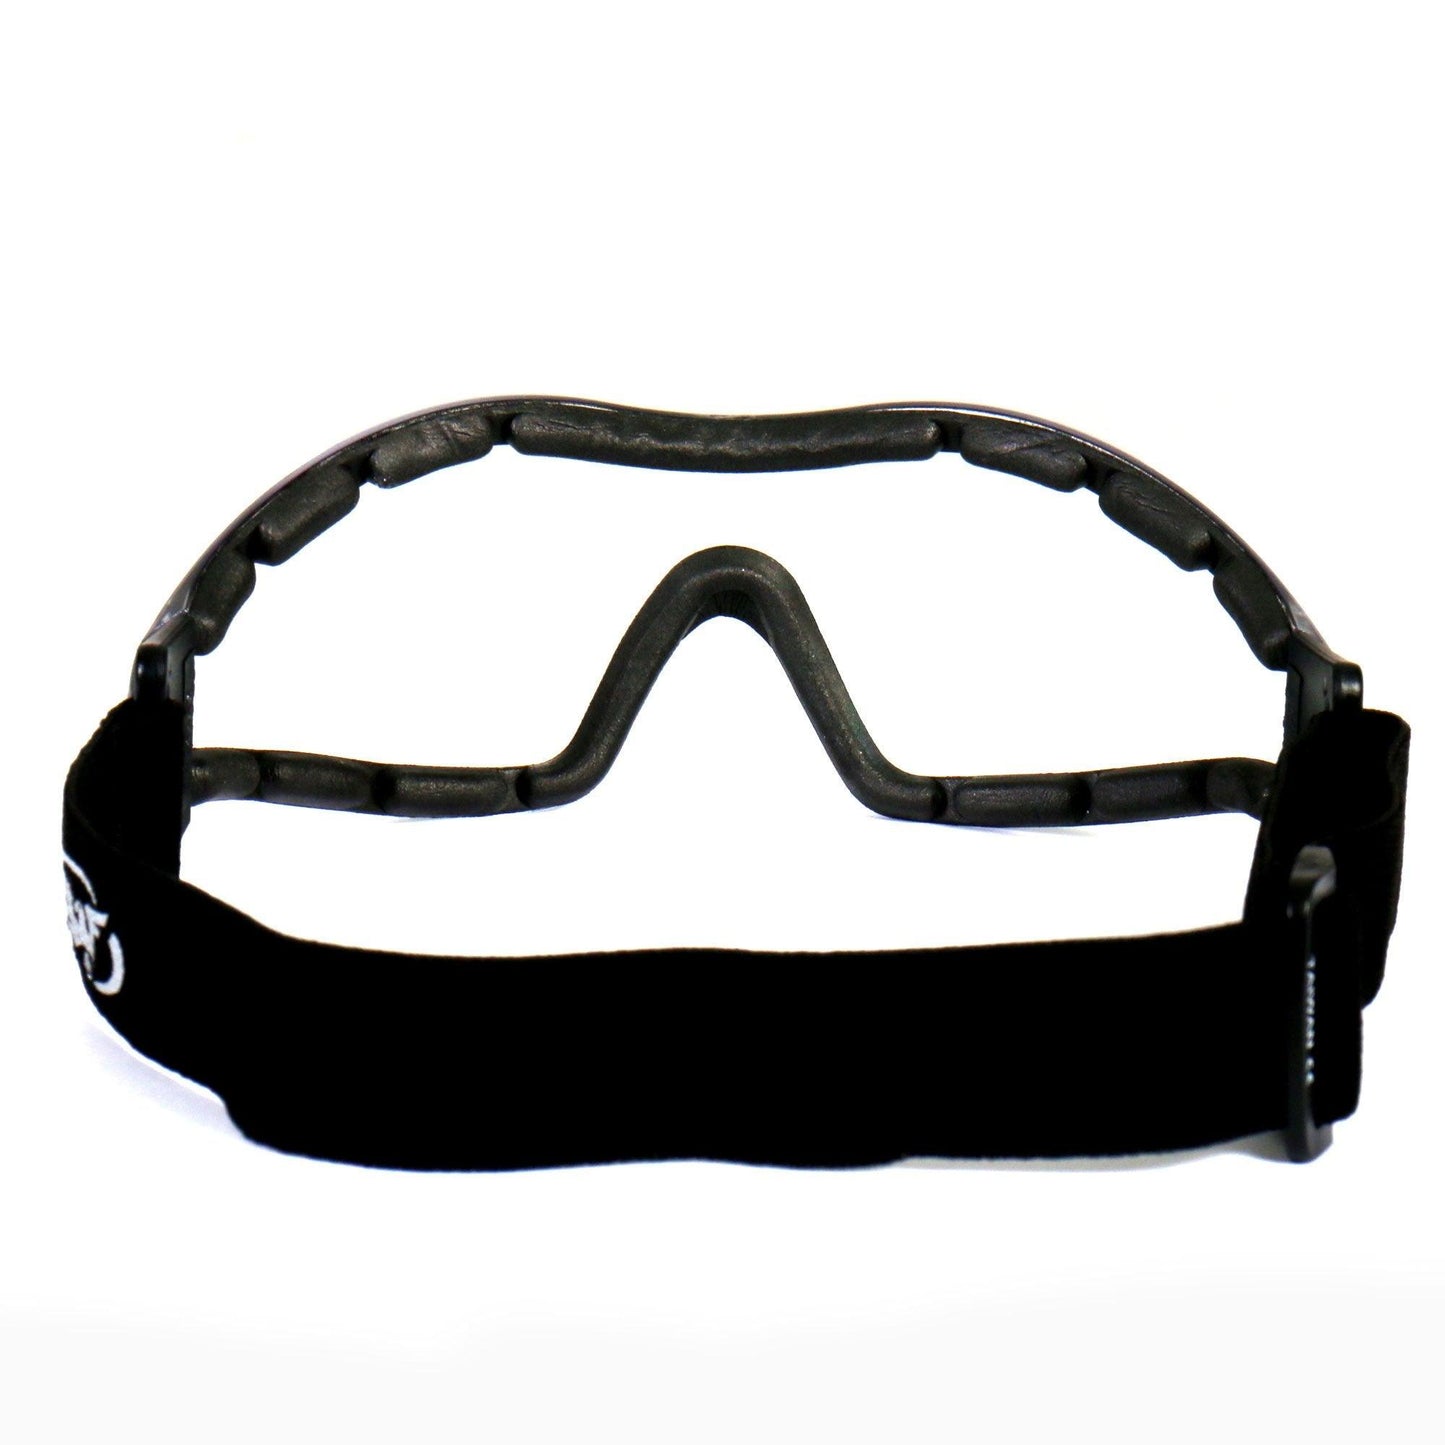 Ares Safety Goggles With Clear Lenses - Military Republic